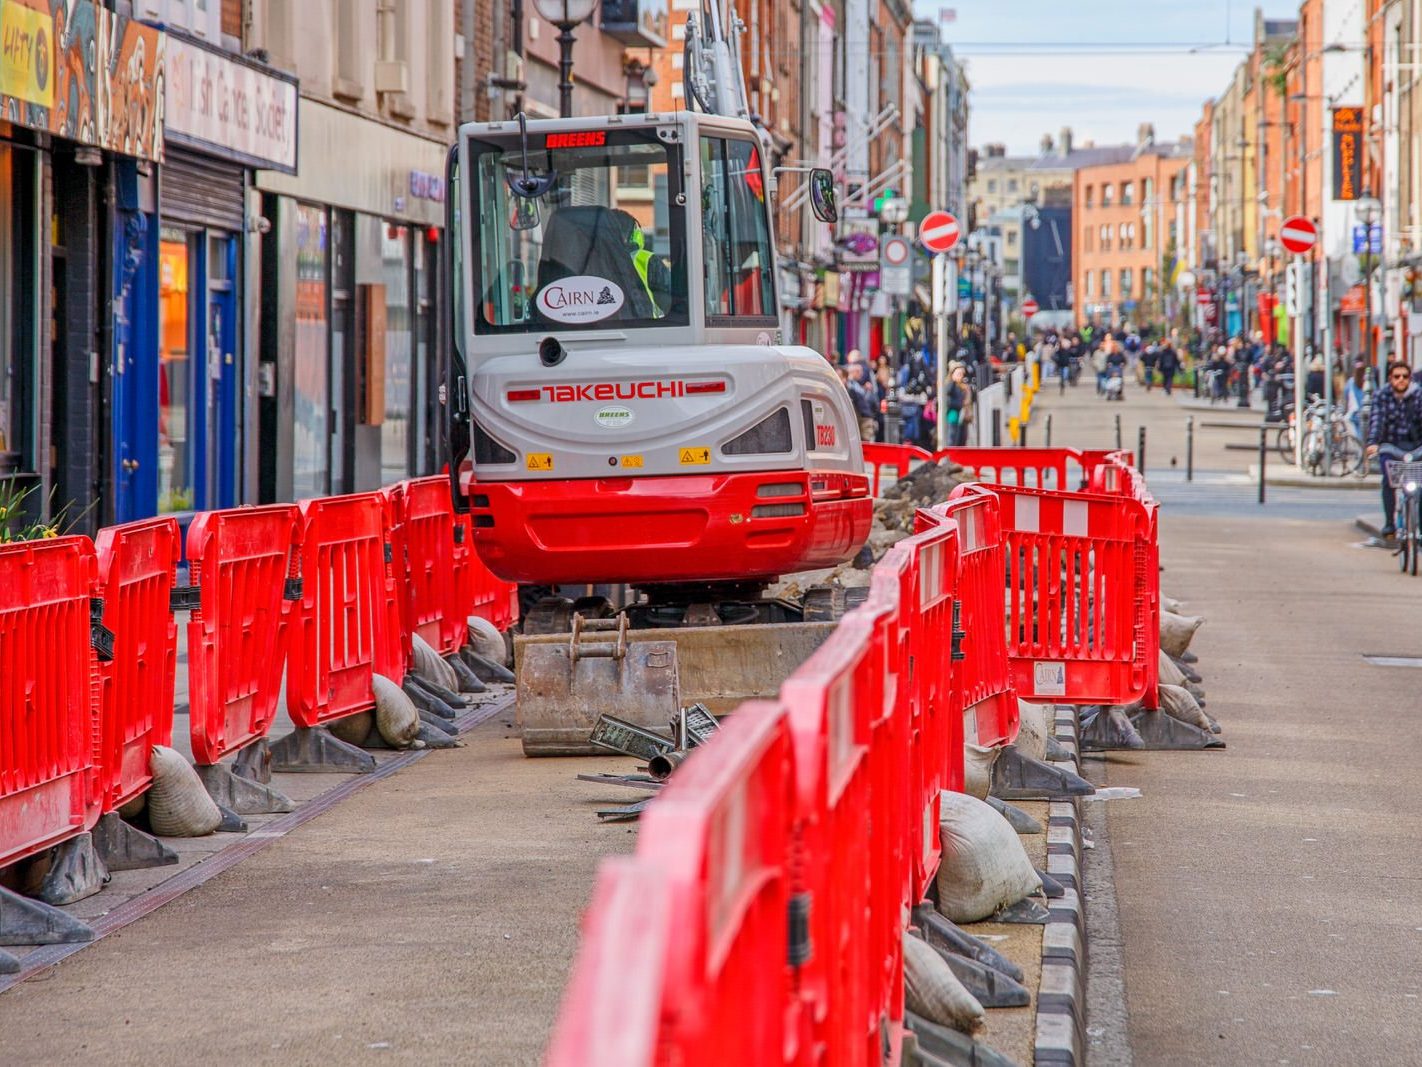 CAPEL STREET [THE RECONFIGURATION WORK HAS BEGUN AT THE LIFFEY END OF THE STREET]-223748-1